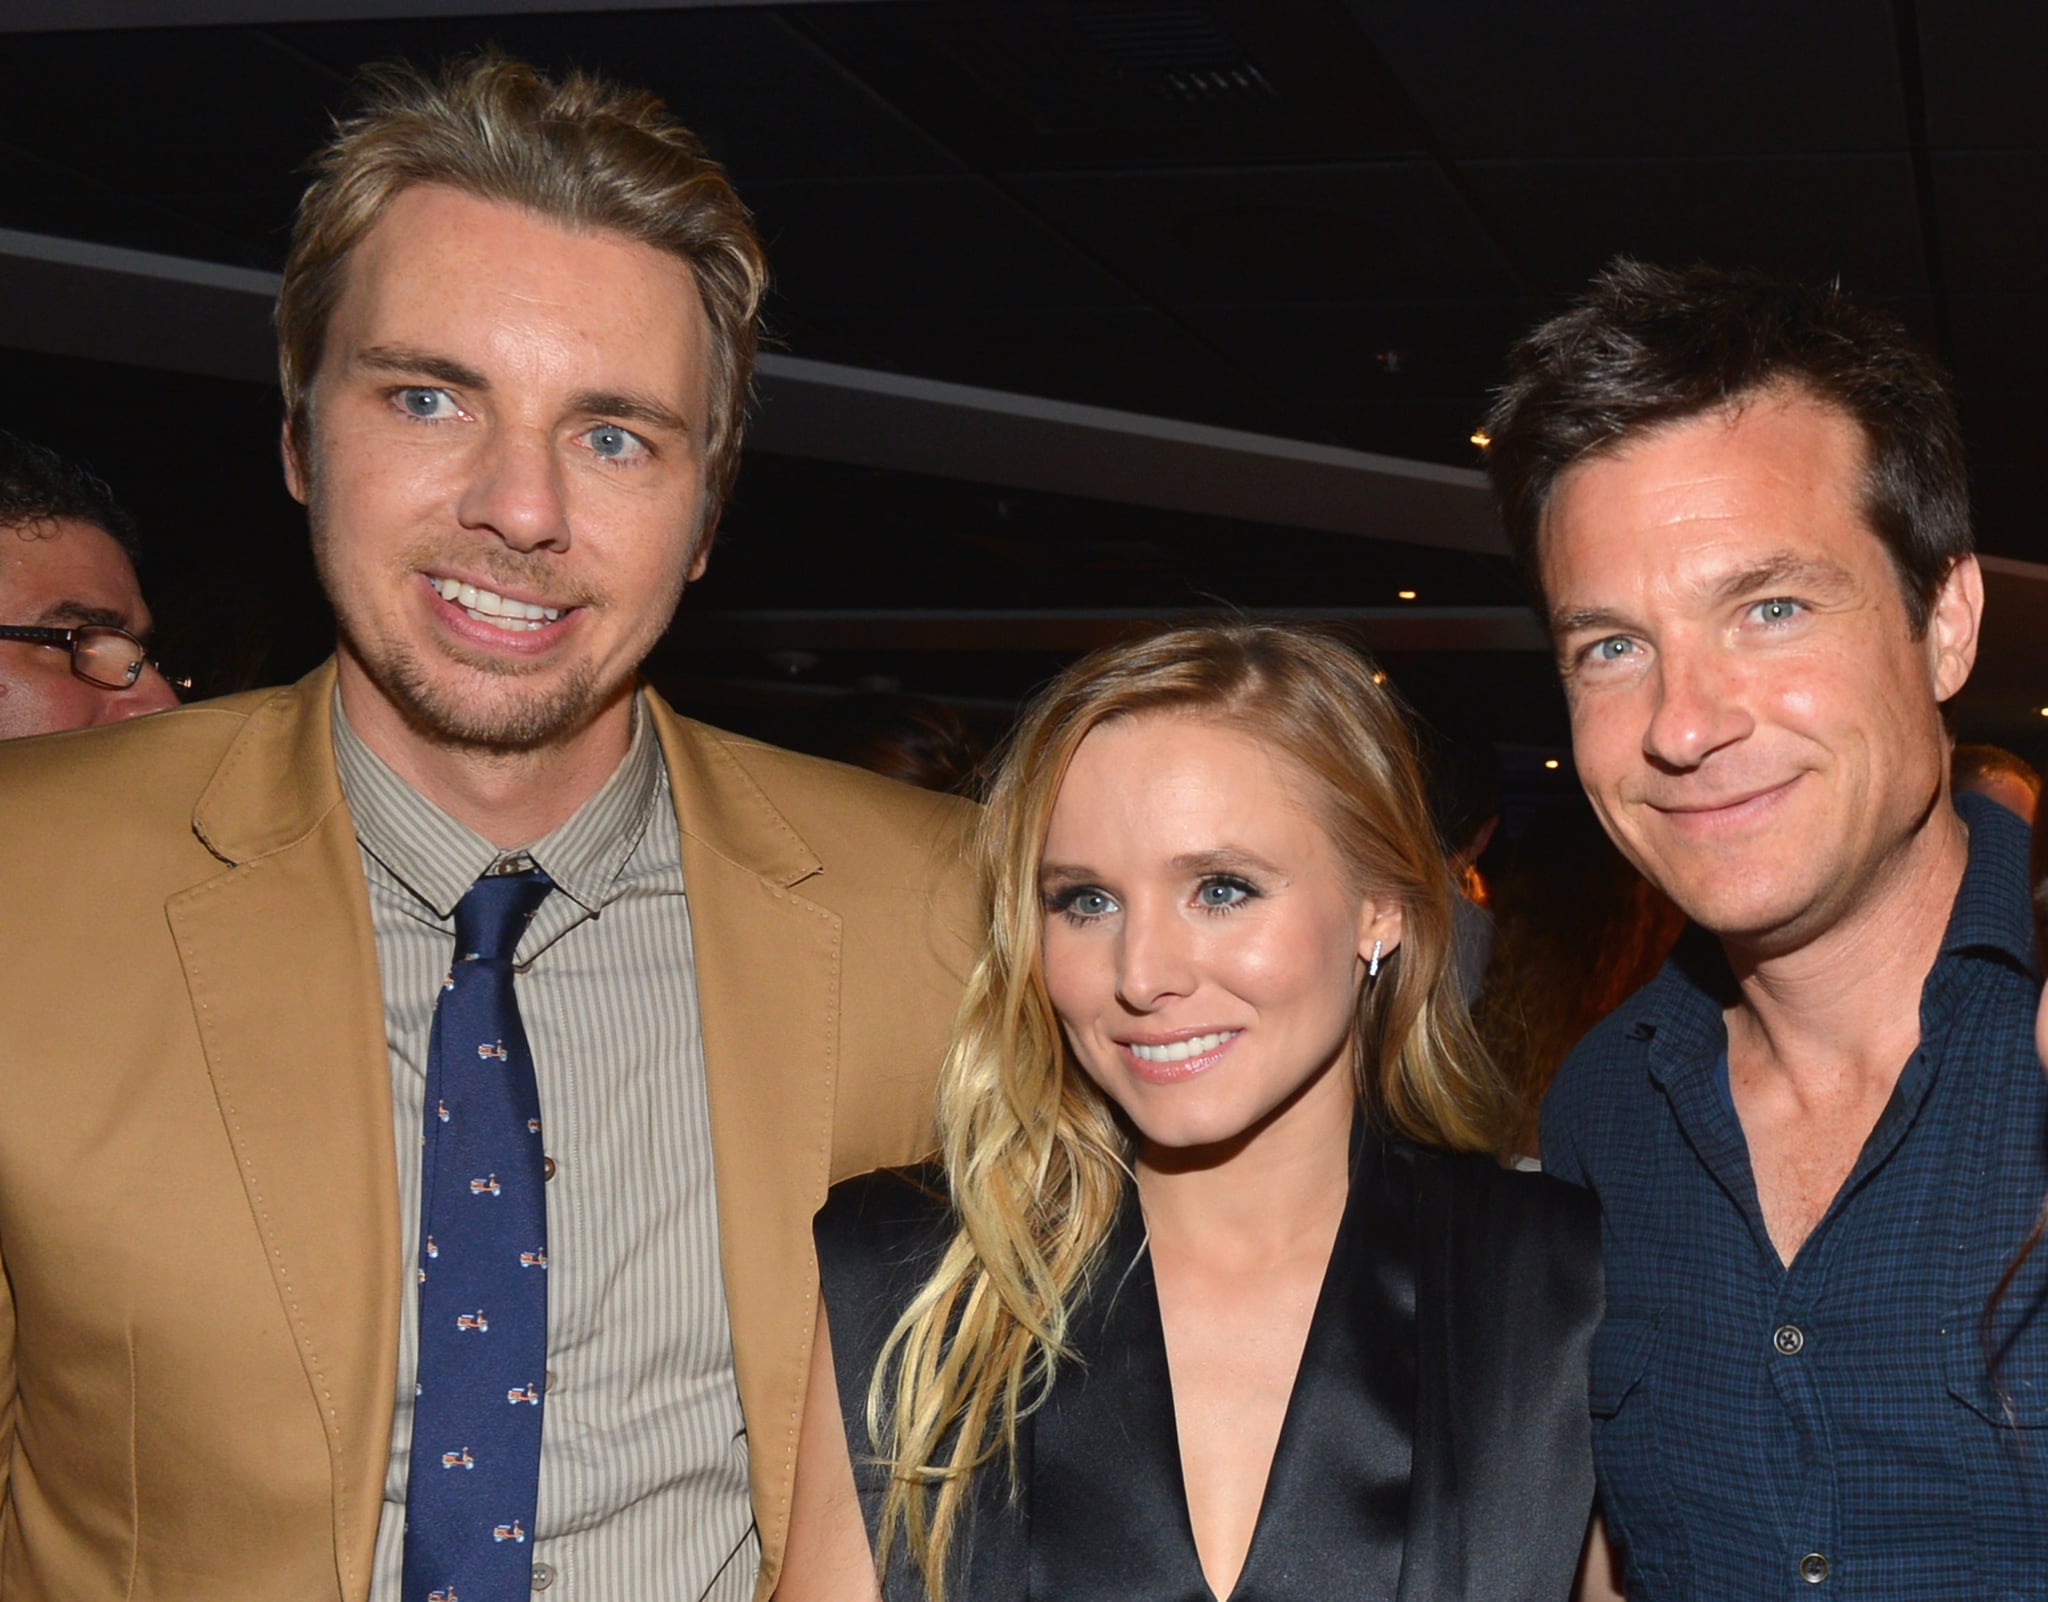 LOS ANGELES, CA - AUGUST 14:  Actors Dax Shepard, Kristen Bell and Jason Bateman attend the after party for the premiere of Open Road Films' 